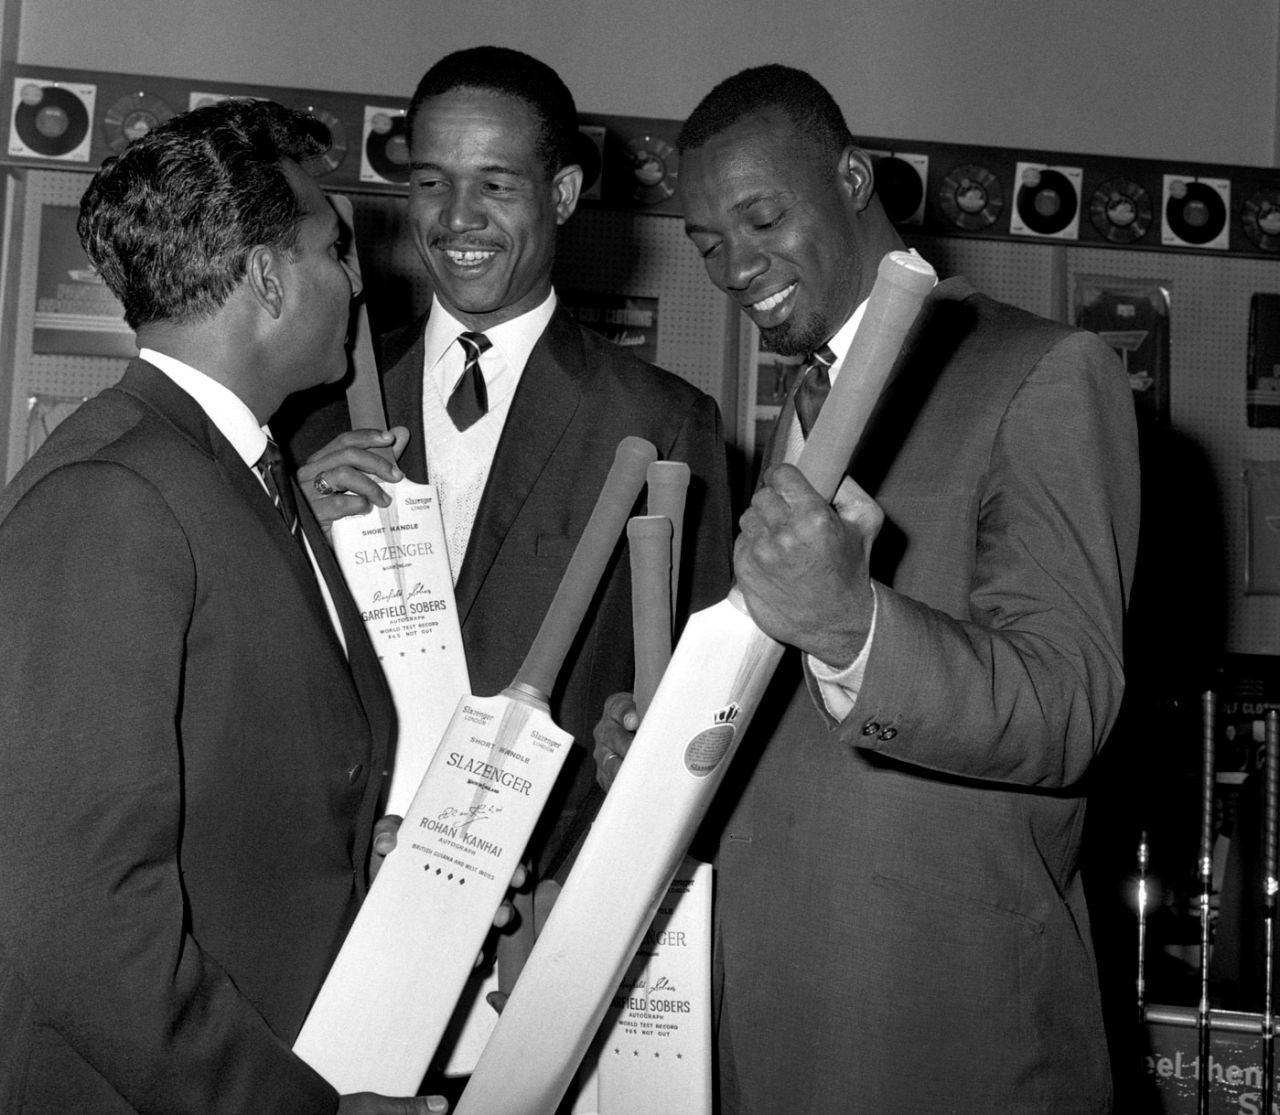 Rohan Kanhai, Garry Sobers and Wes Hall inspect bats at the Slazenger store in Croydon, April 18, 1966